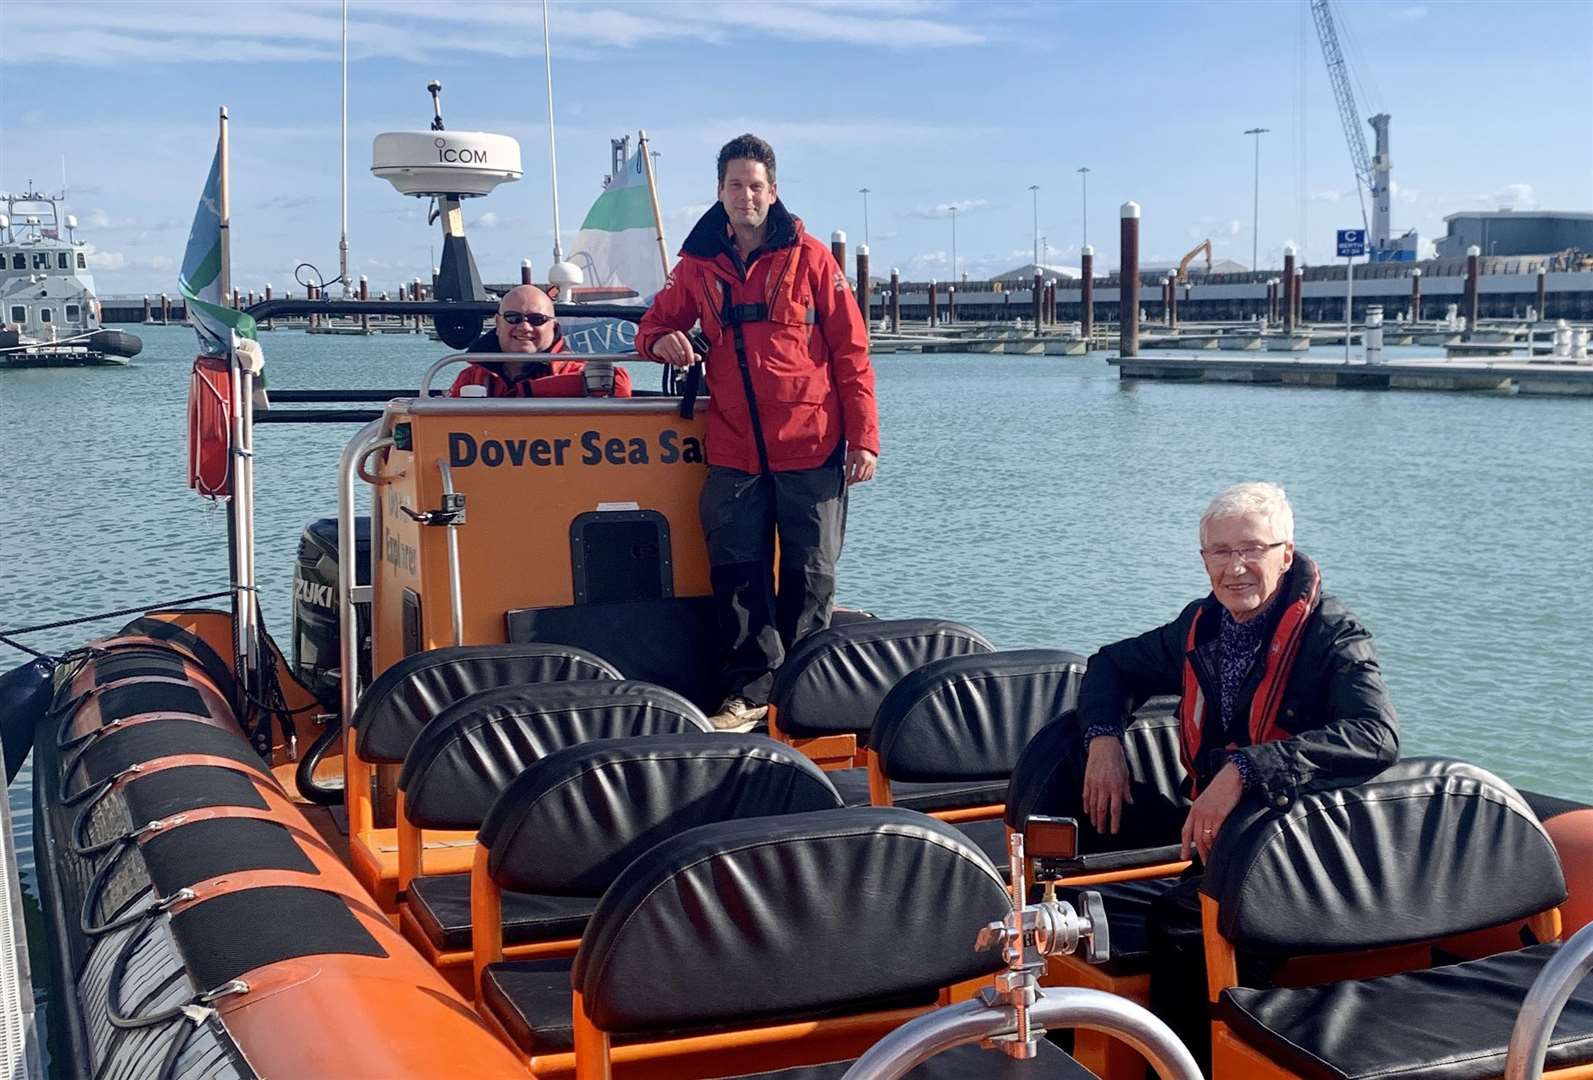 Paul joins the Skipper and crew on the Dover Explore Speed boat Picture: Olga Productions/ITV Pictures